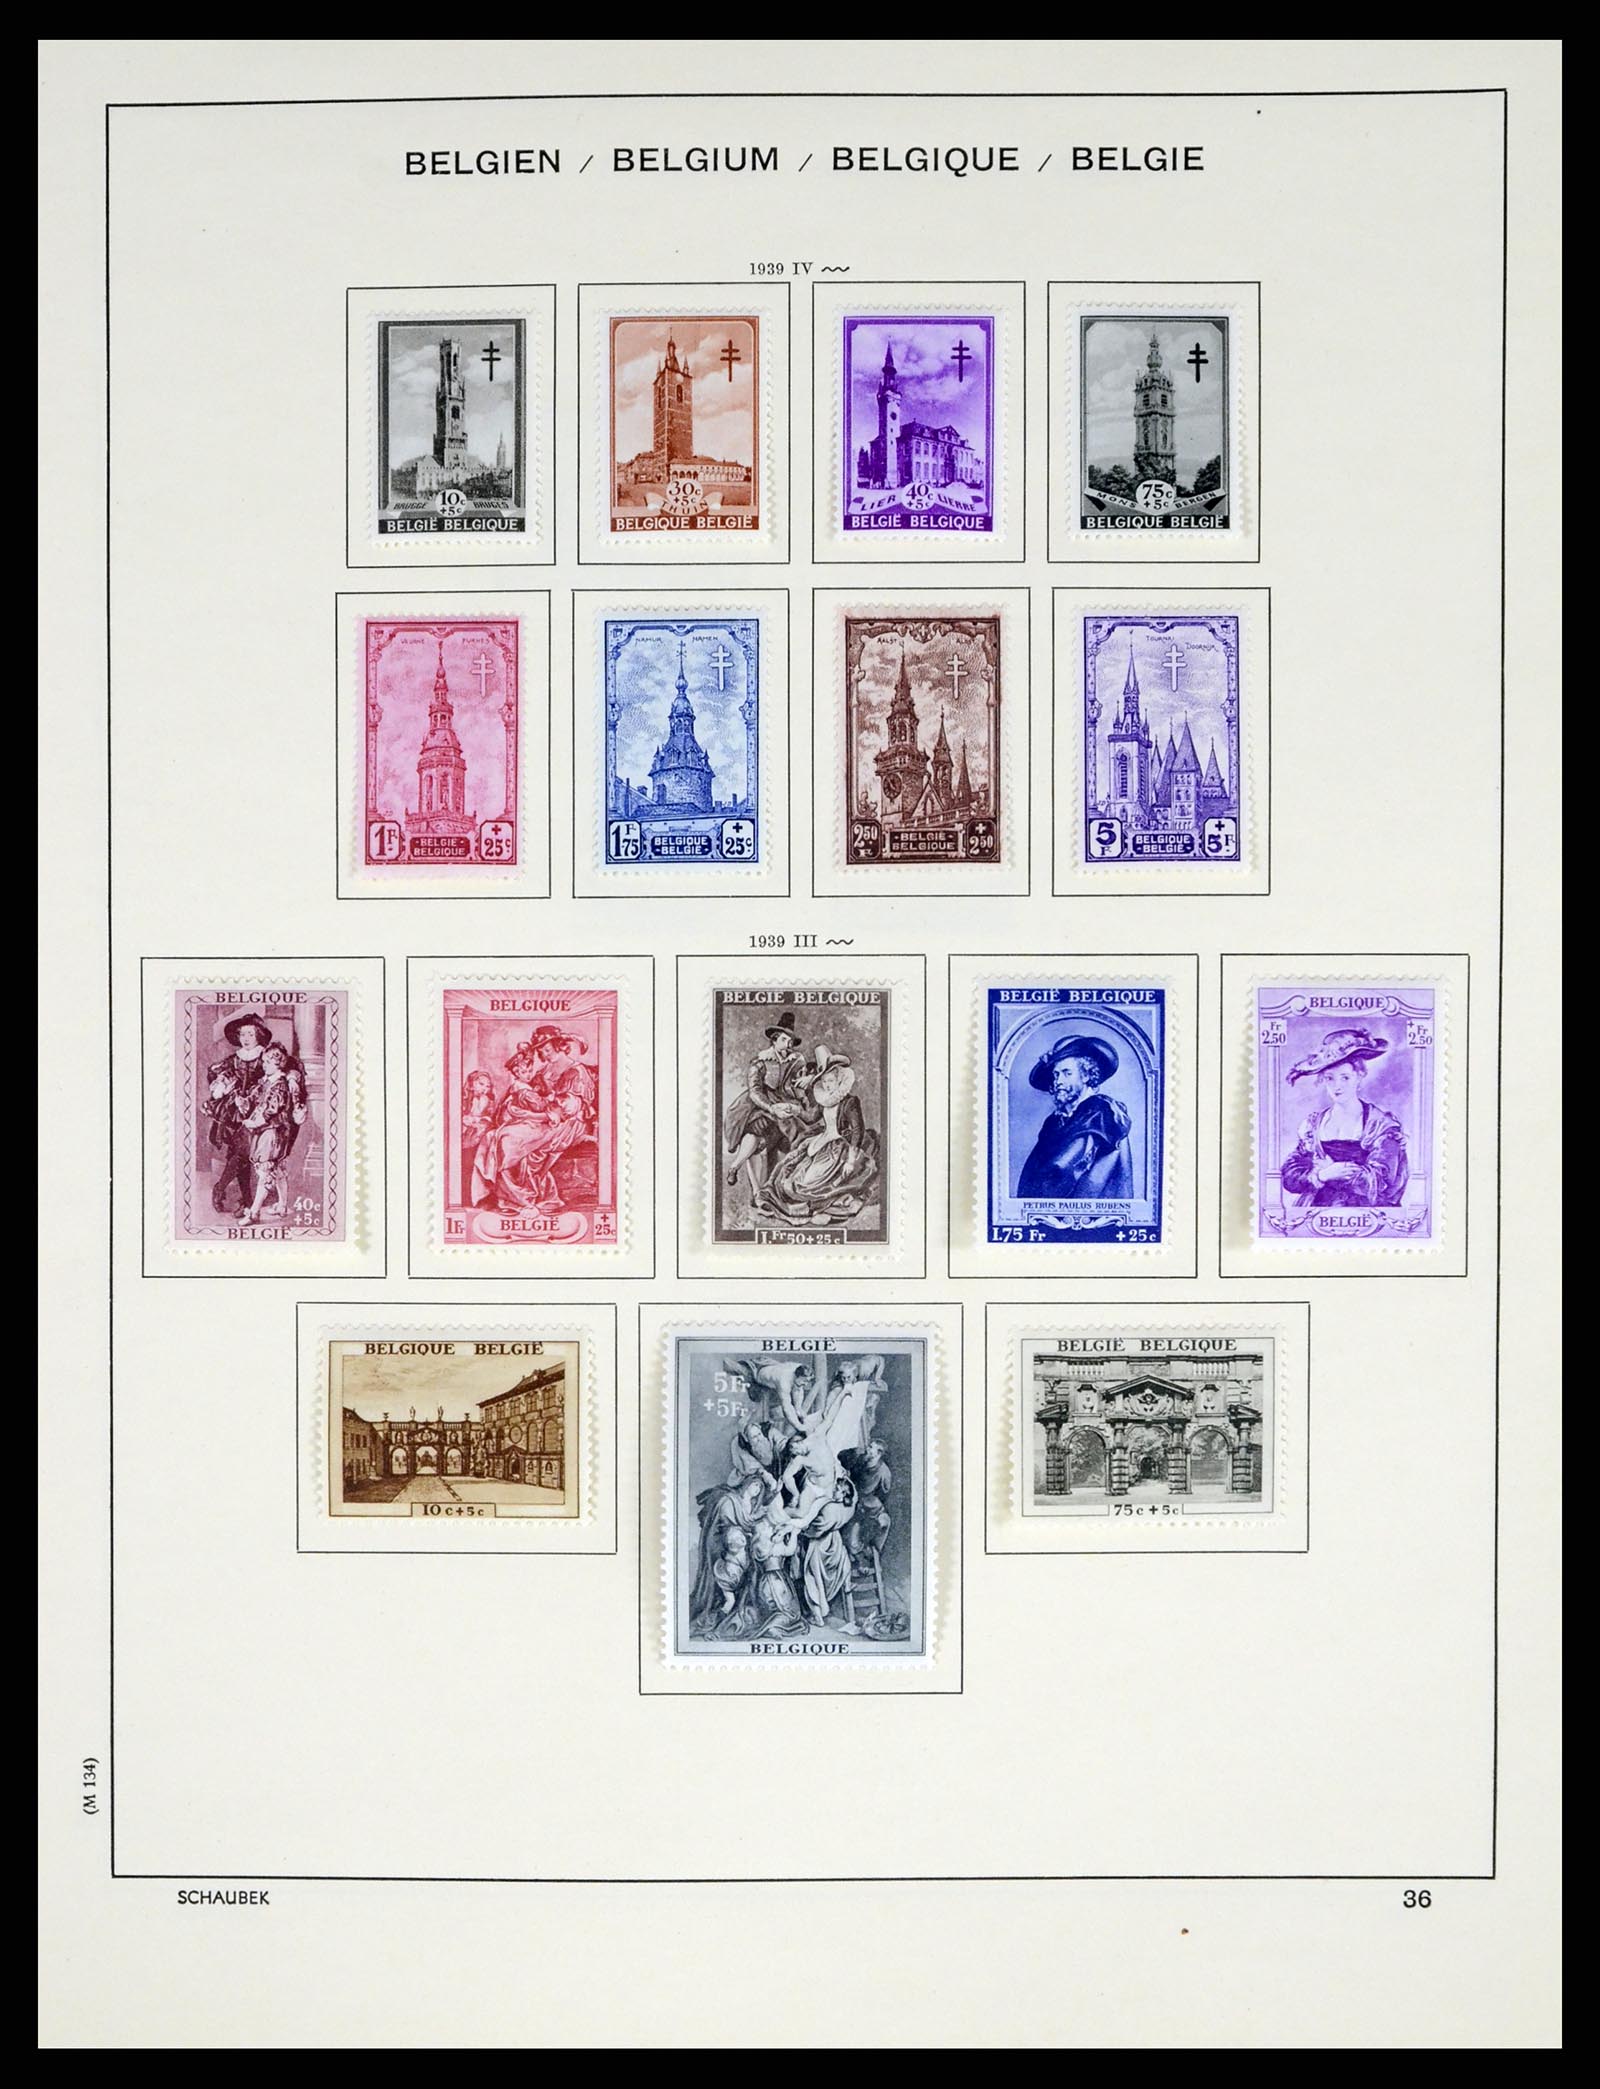 37595 038 - Stamp collection 37595 Super collection Belgium 1849-2015!